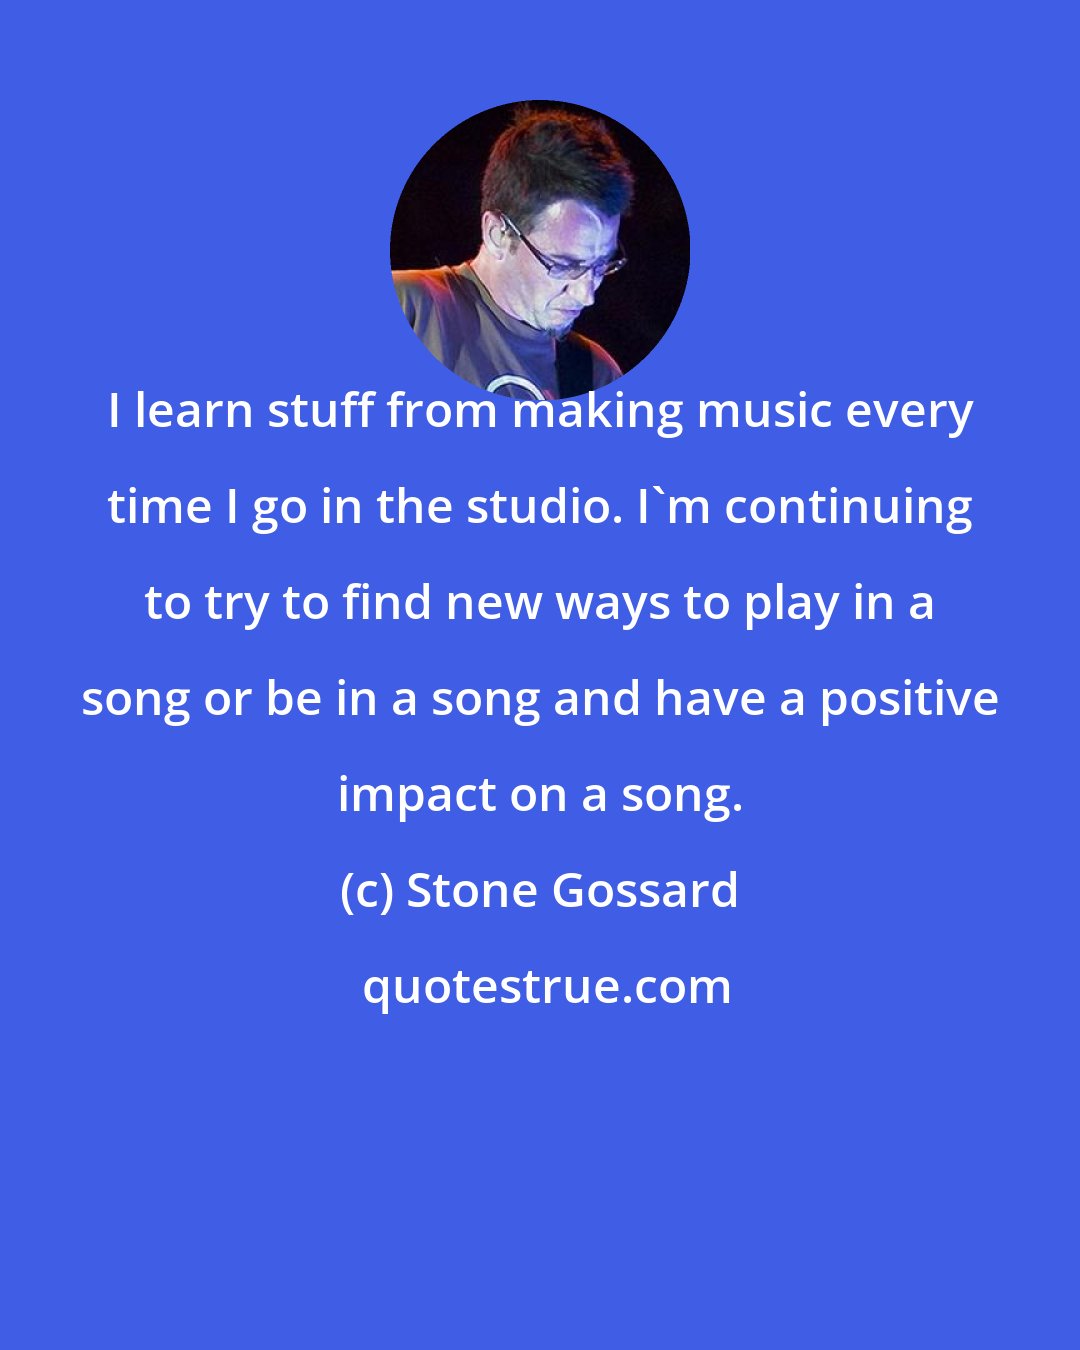 Stone Gossard: I learn stuff from making music every time I go in the studio. I'm continuing to try to find new ways to play in a song or be in a song and have a positive impact on a song.